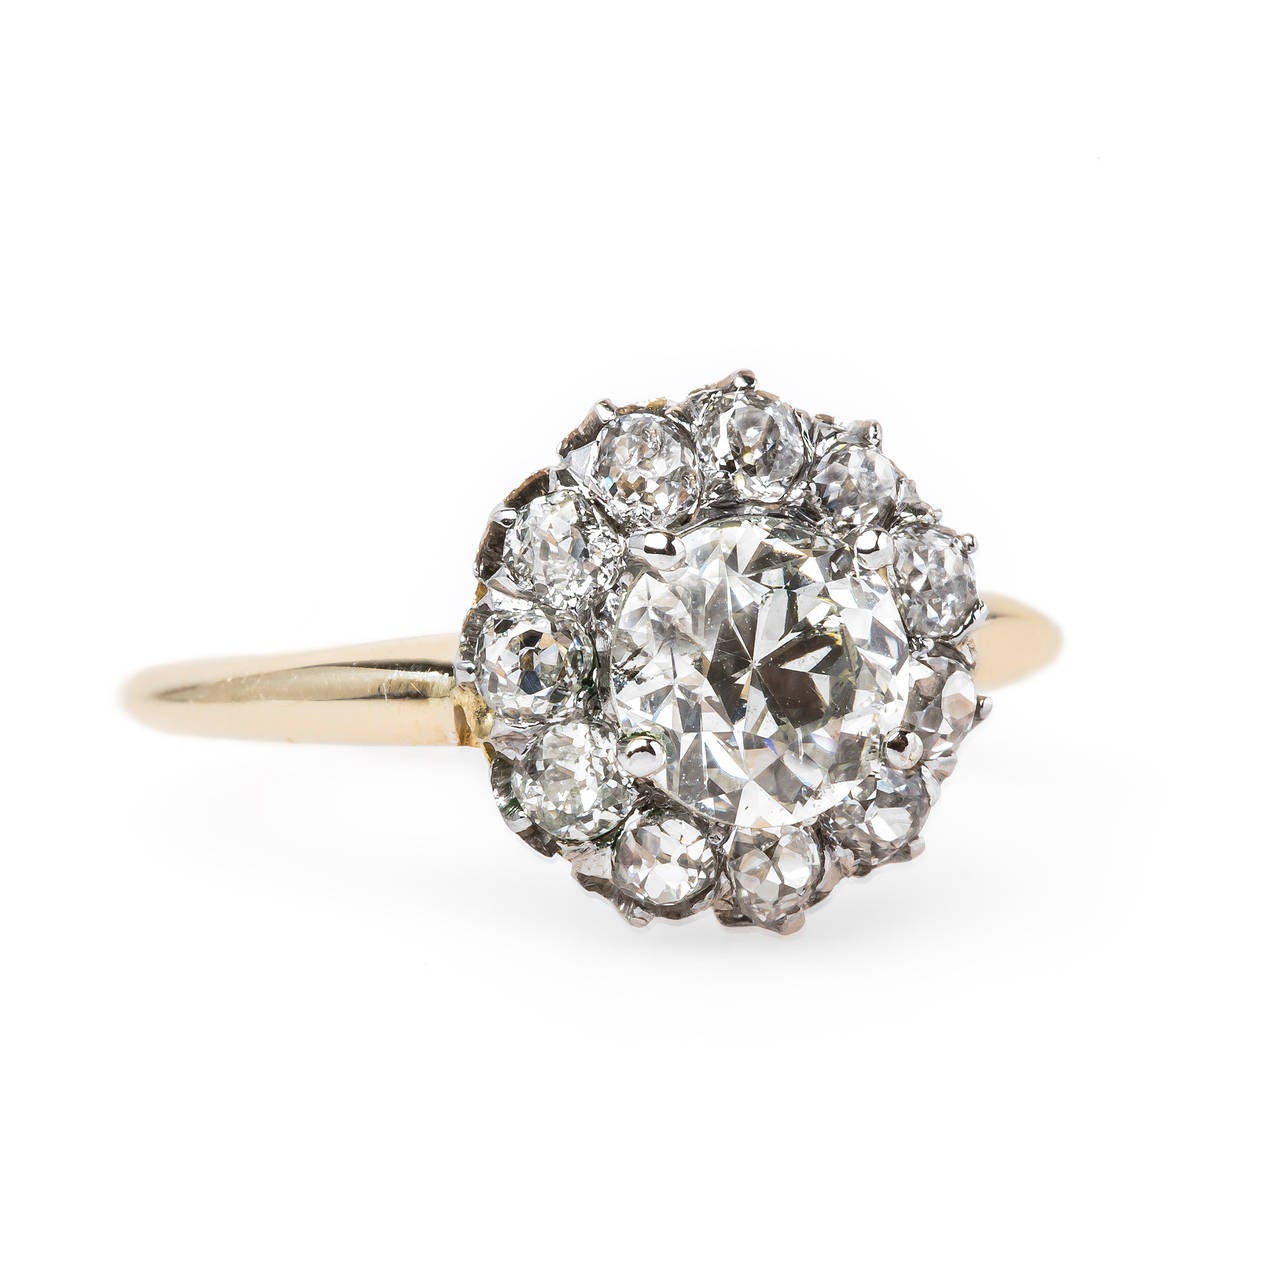 Sardinia is an incredible Victorian era (circa 1895) platinum-topped 18k yellow gold cluster ring centering a four-prong set EGL certified 1.04ct Old European Cut diamond graded J color and SI2 clarity. This antique beauty is further accented with a